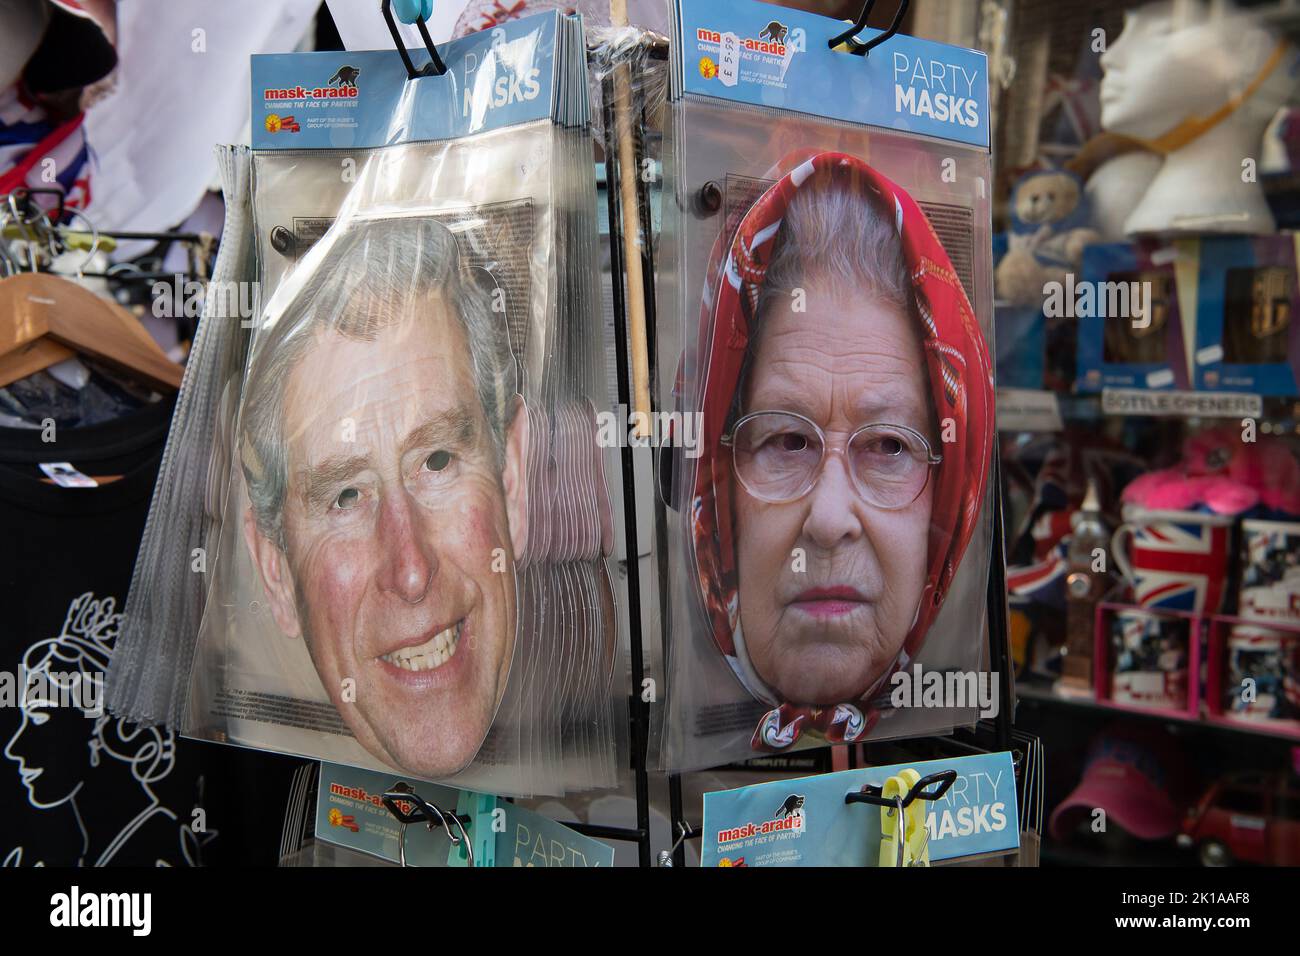 Windsor, Berkshire, UK. 16th September, 2022. Cardboard cut out face masks for sale in a tourist shop. The town of Windsor prepares for the return of Her Majesty the Queen on Monday after her State Funeral in London. Queen Elizabeth. Following a committal service at Westminster Abbey, Her Majesty will be laid to rest in the King George VI Memorial Chapel, St George's Chapel at Windsor Castle at a private ceremony attended by the Royal family. Credit: Maureen McLean/Alamy Live News Stock Photo